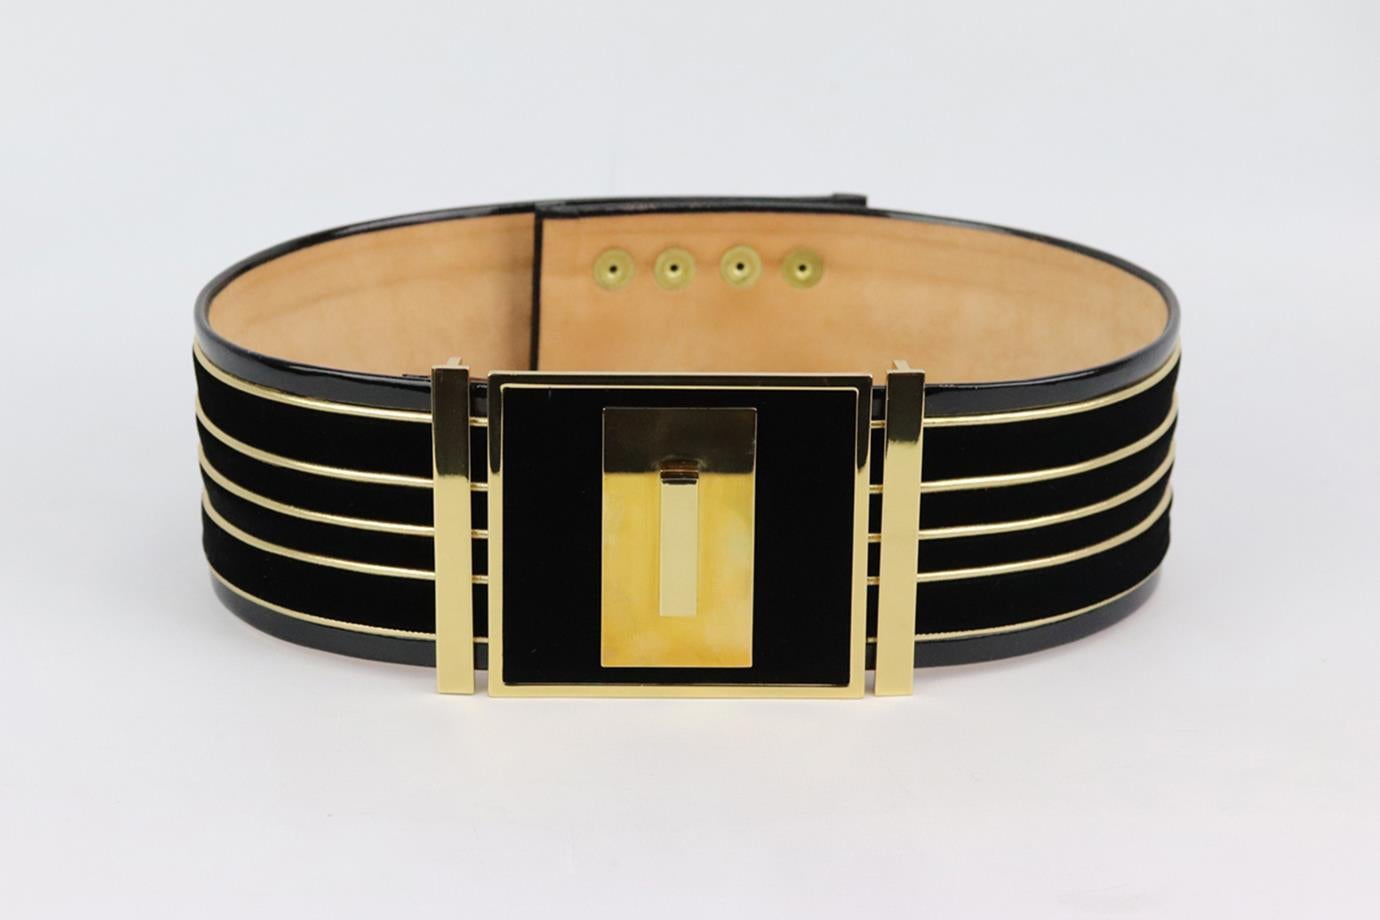 This waist belt by Balmain will give any look a statement appeal, designed to accentuate your waist, it's finished with gold and velvet striped details and the brand's signature embossed snap fastenings. Black velvet, black patent-leather, gold